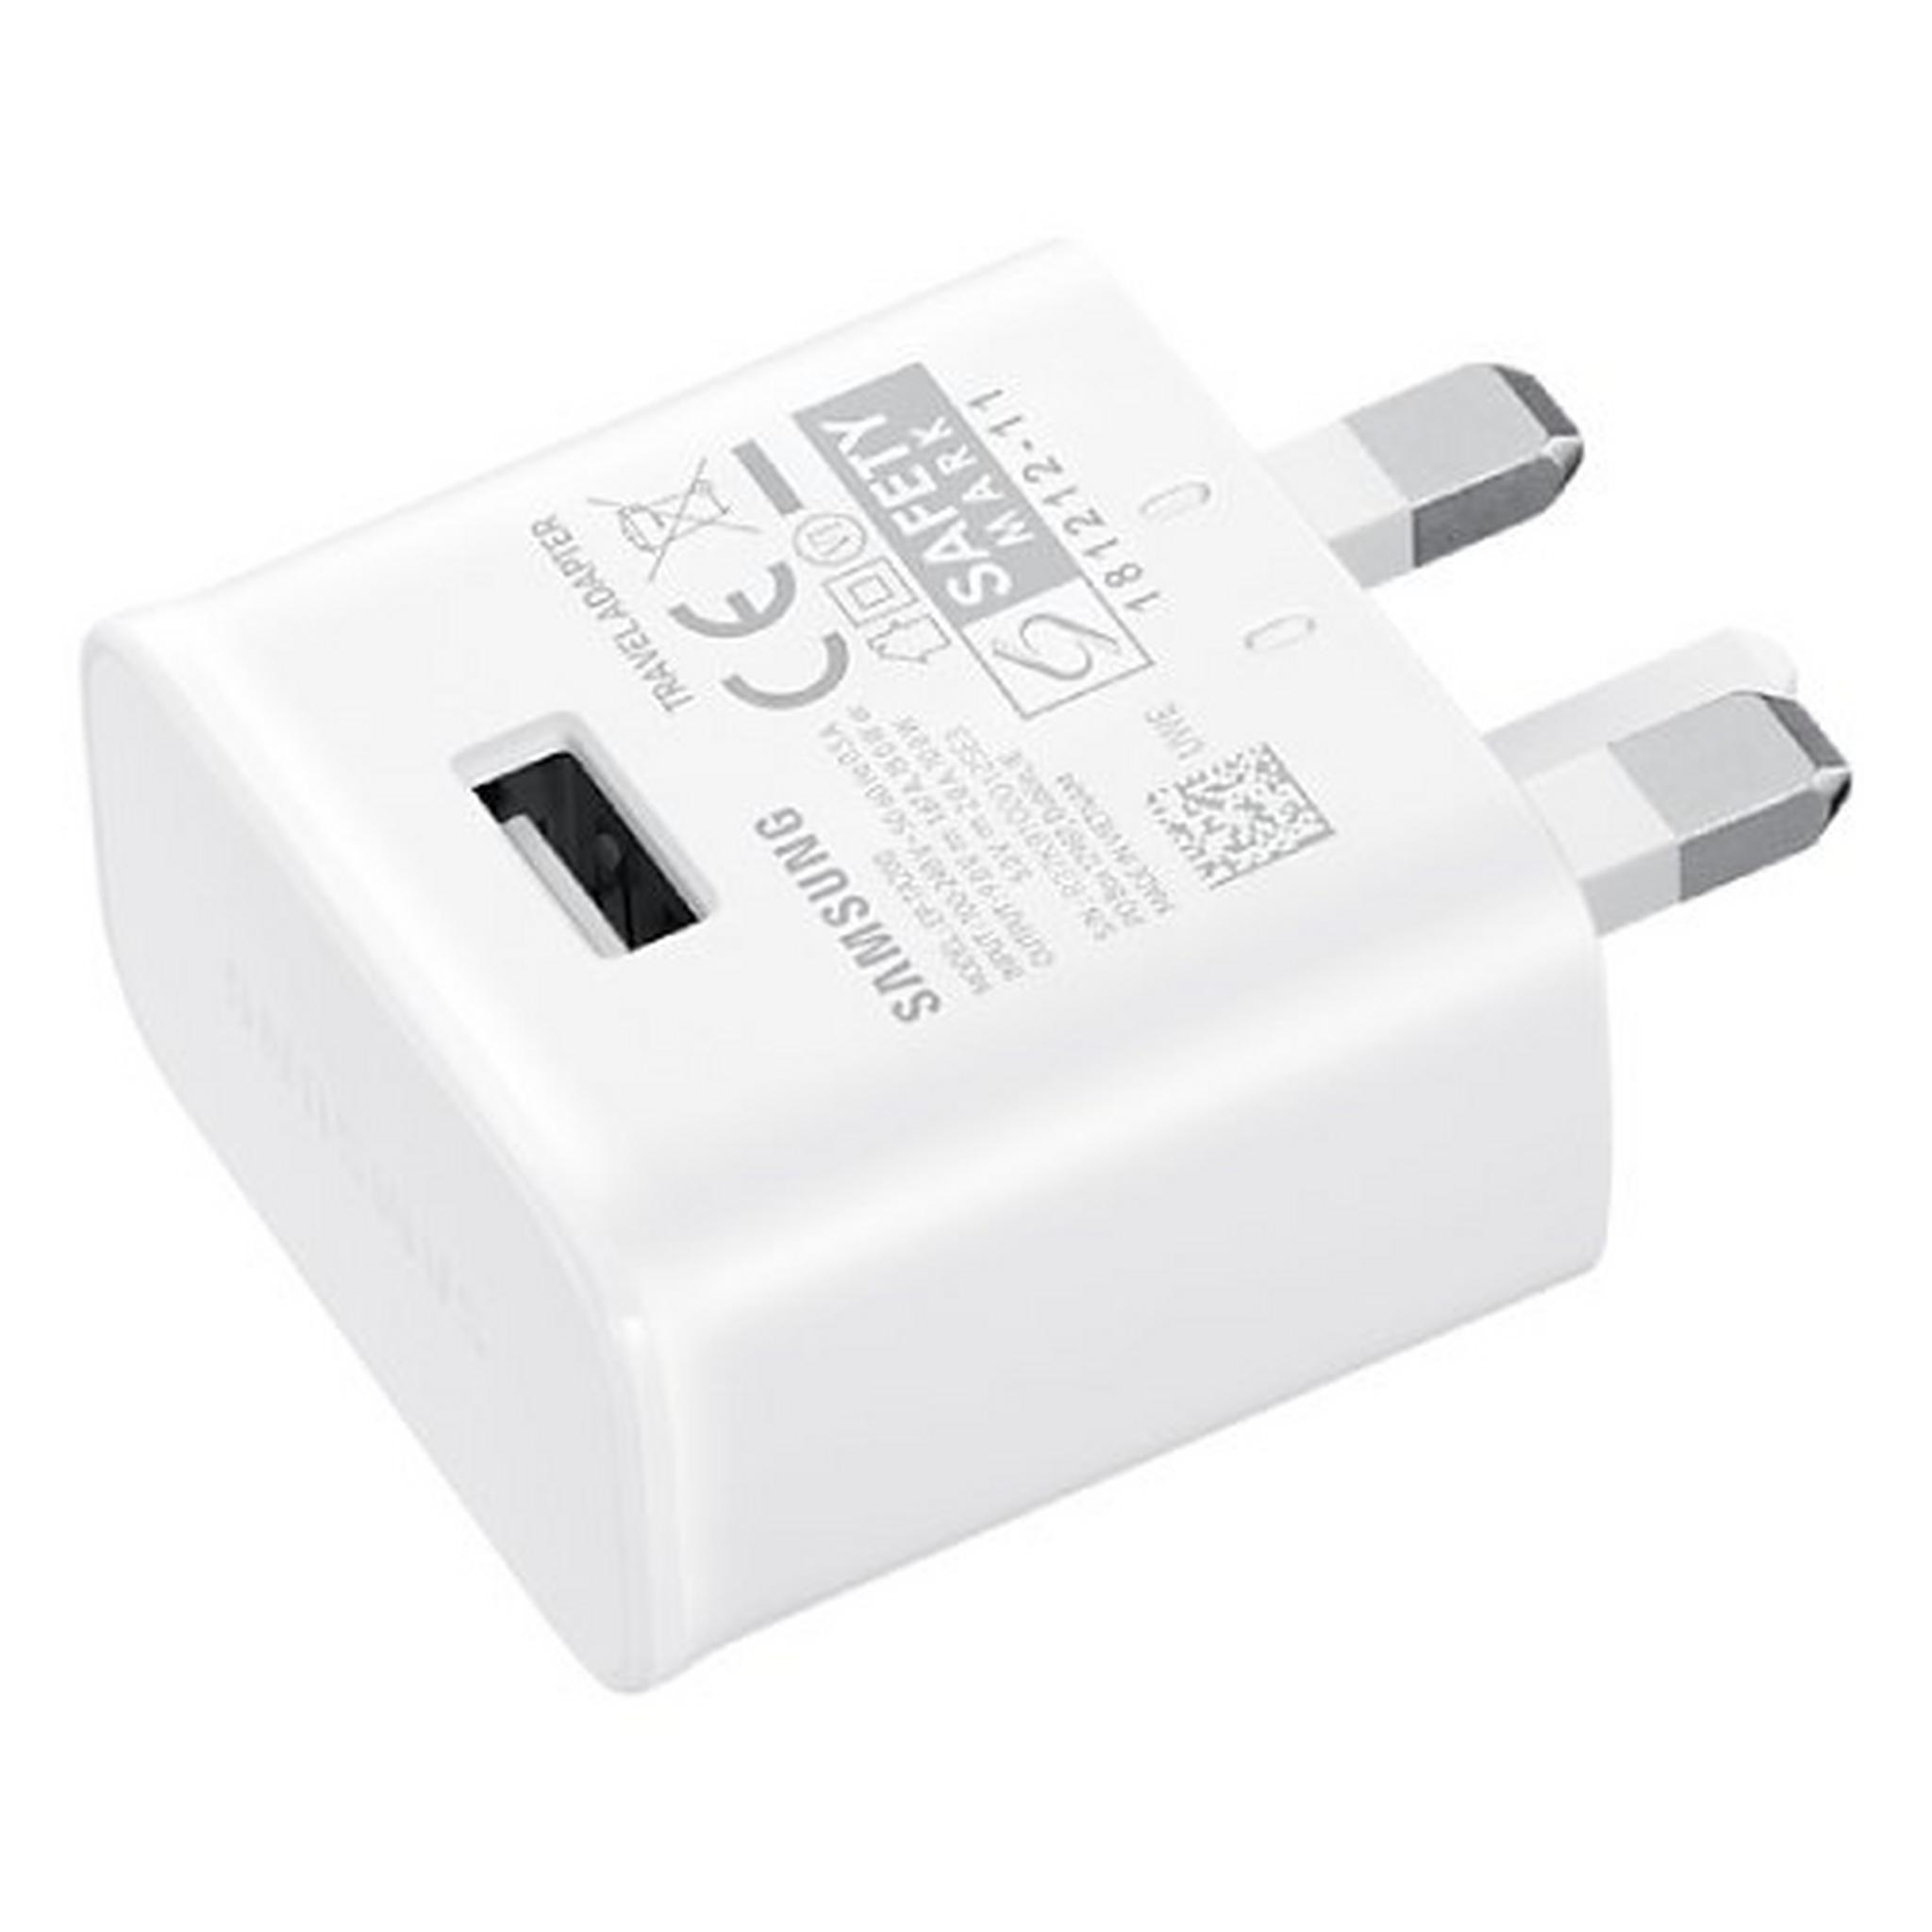 Samsung 15W AFC Micro USB Type Travel Adapter - White